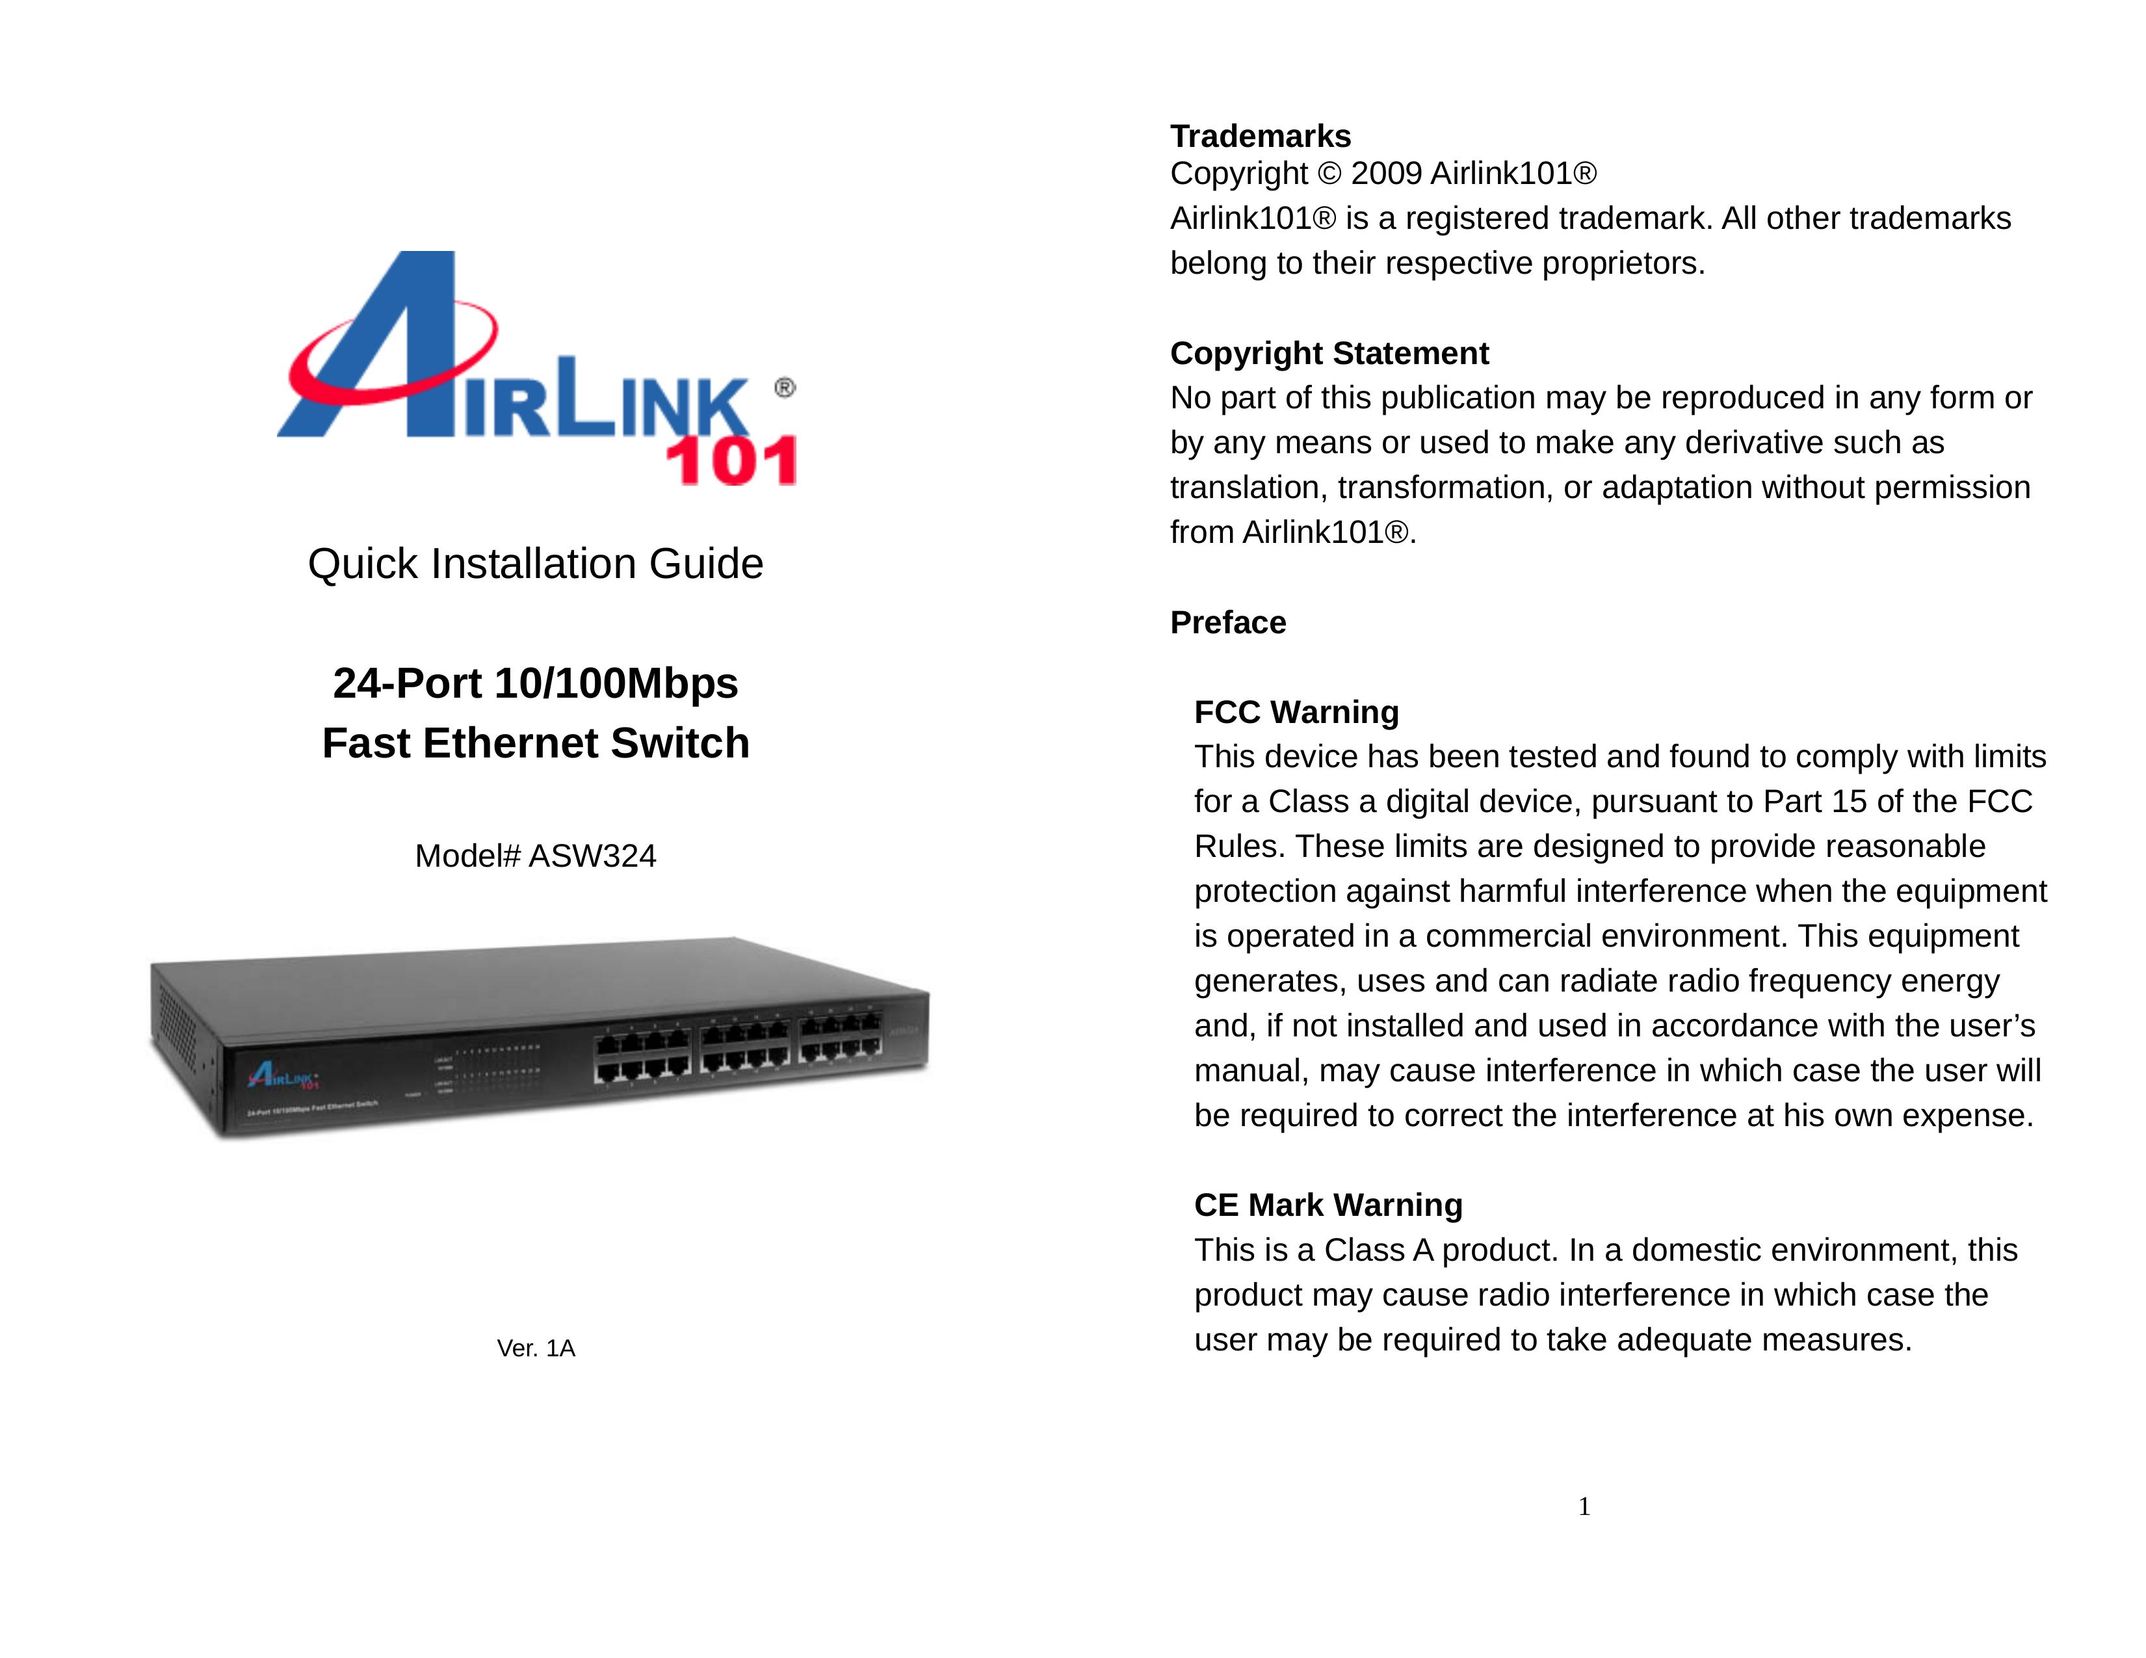 Airlink101 ASW324 Switch User Manual